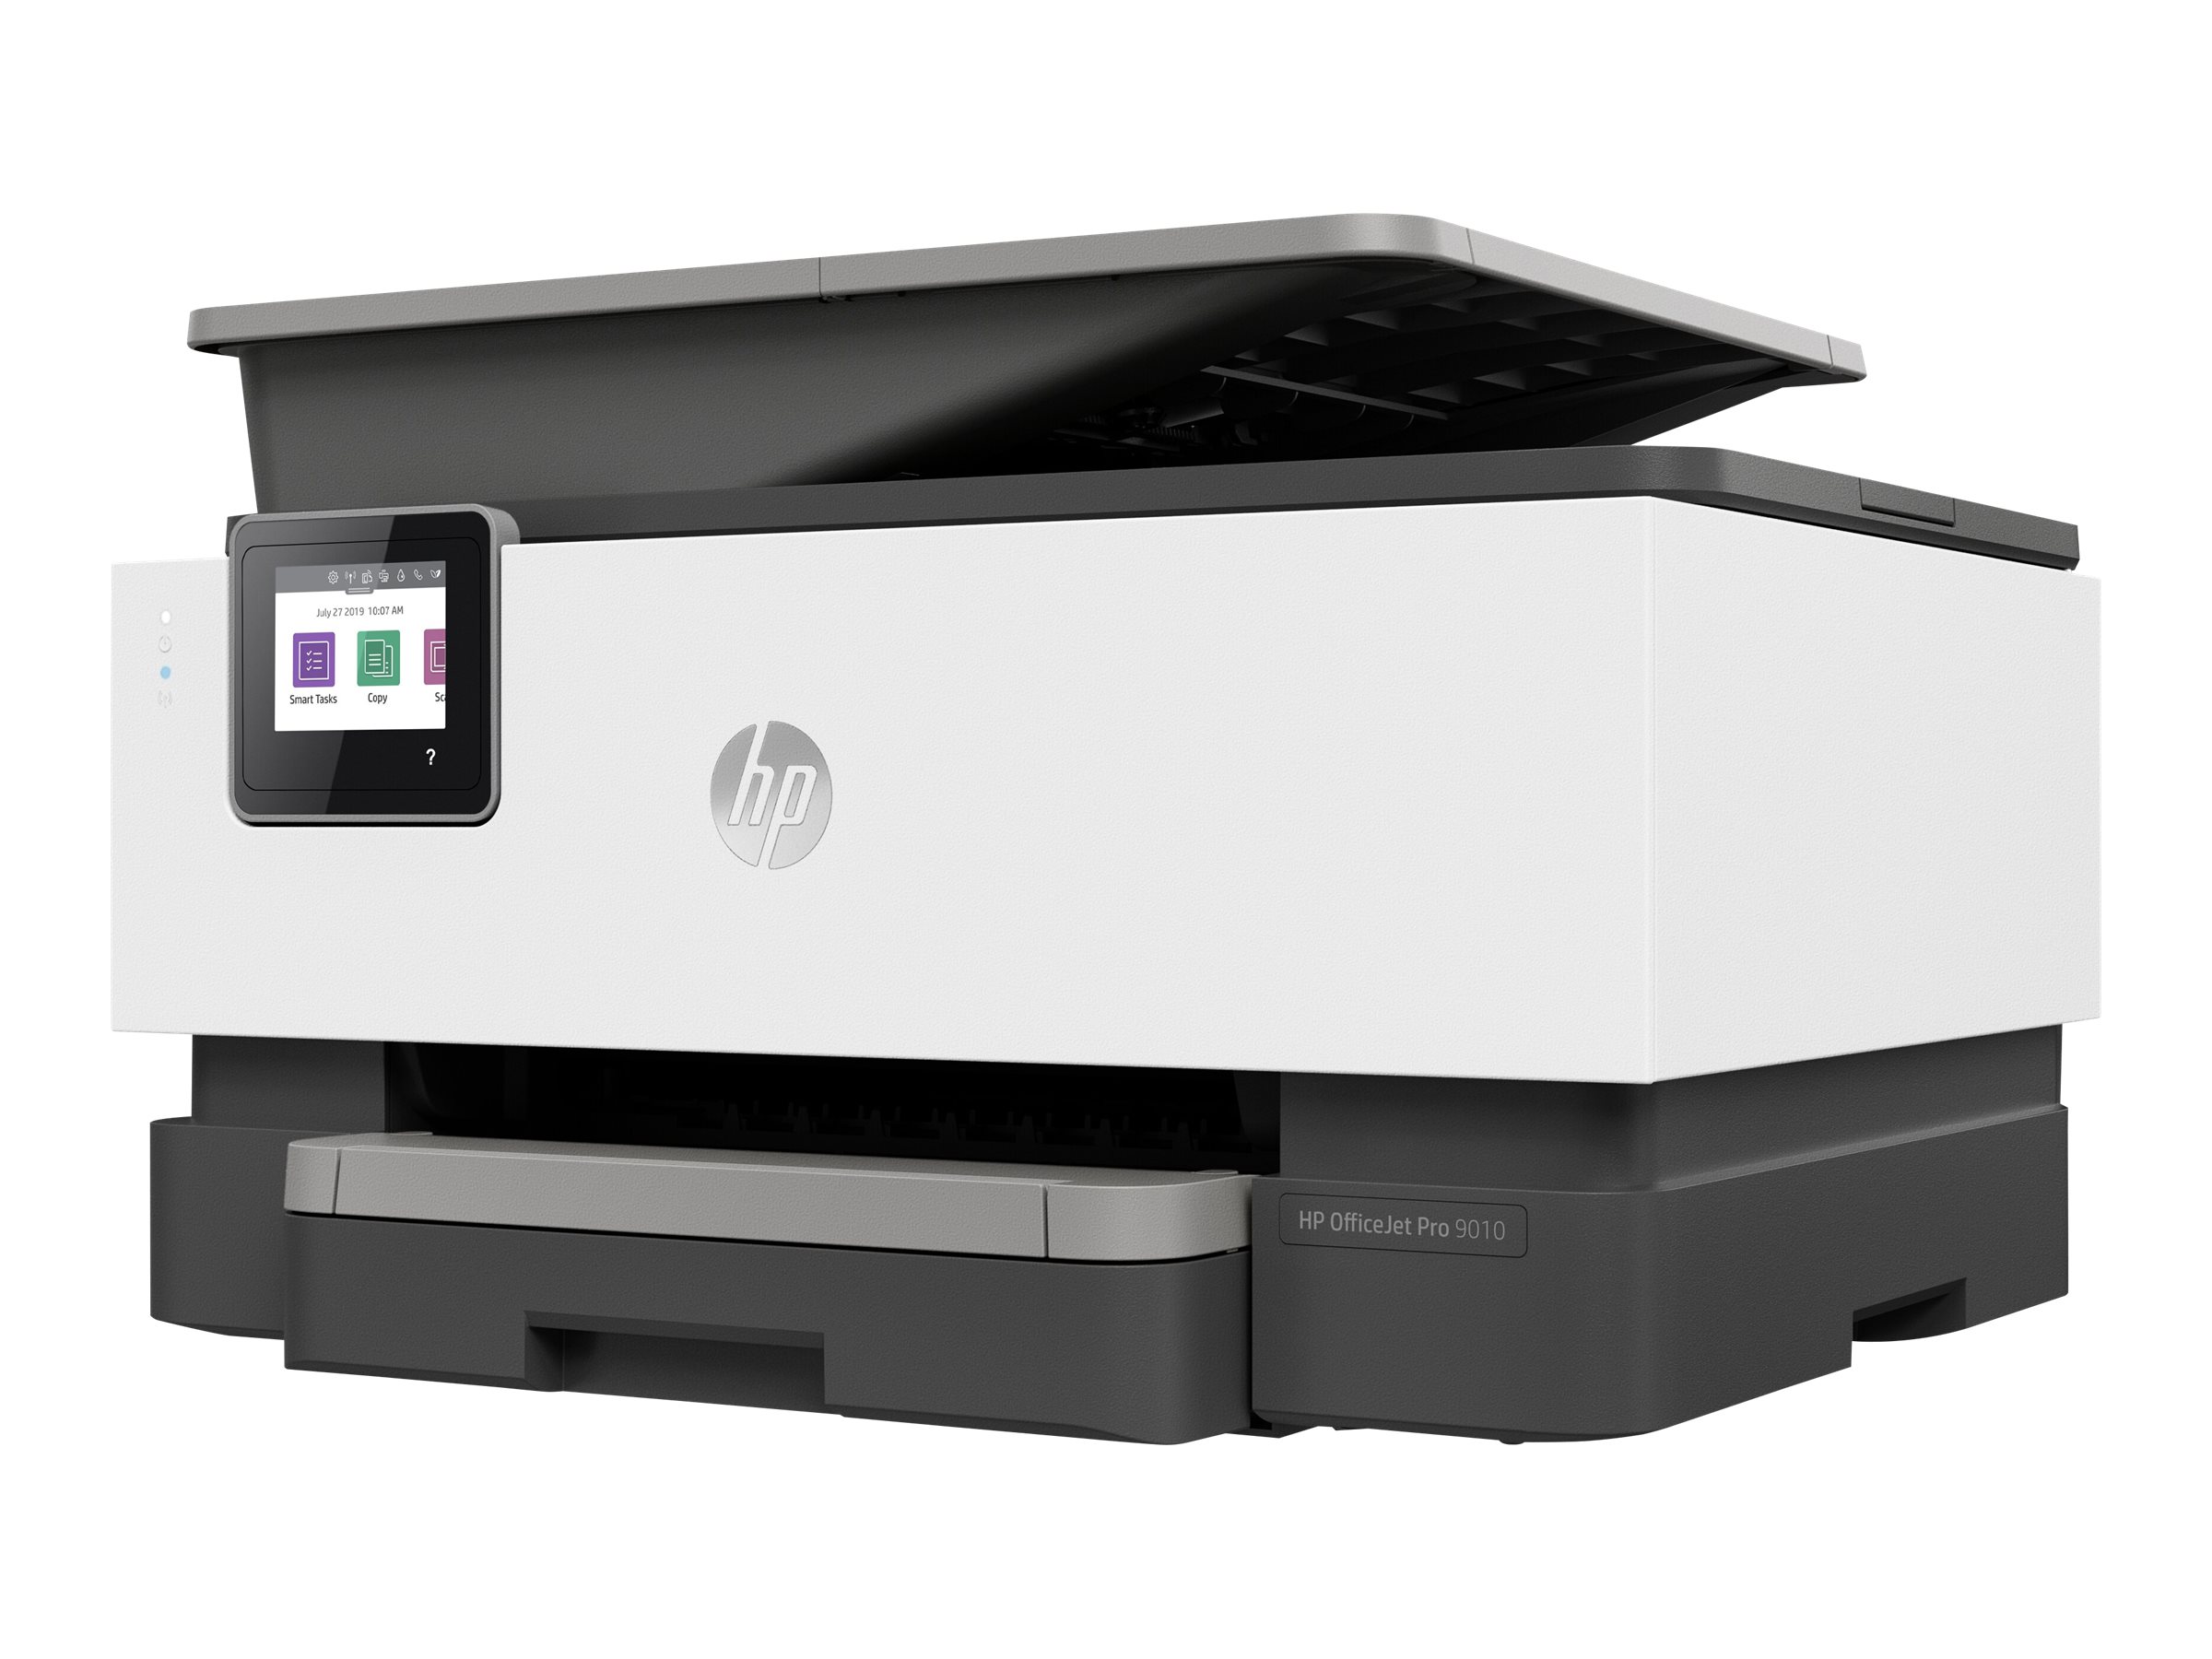 Compatible, Multipack hp officejet pro 9010 for Printers 